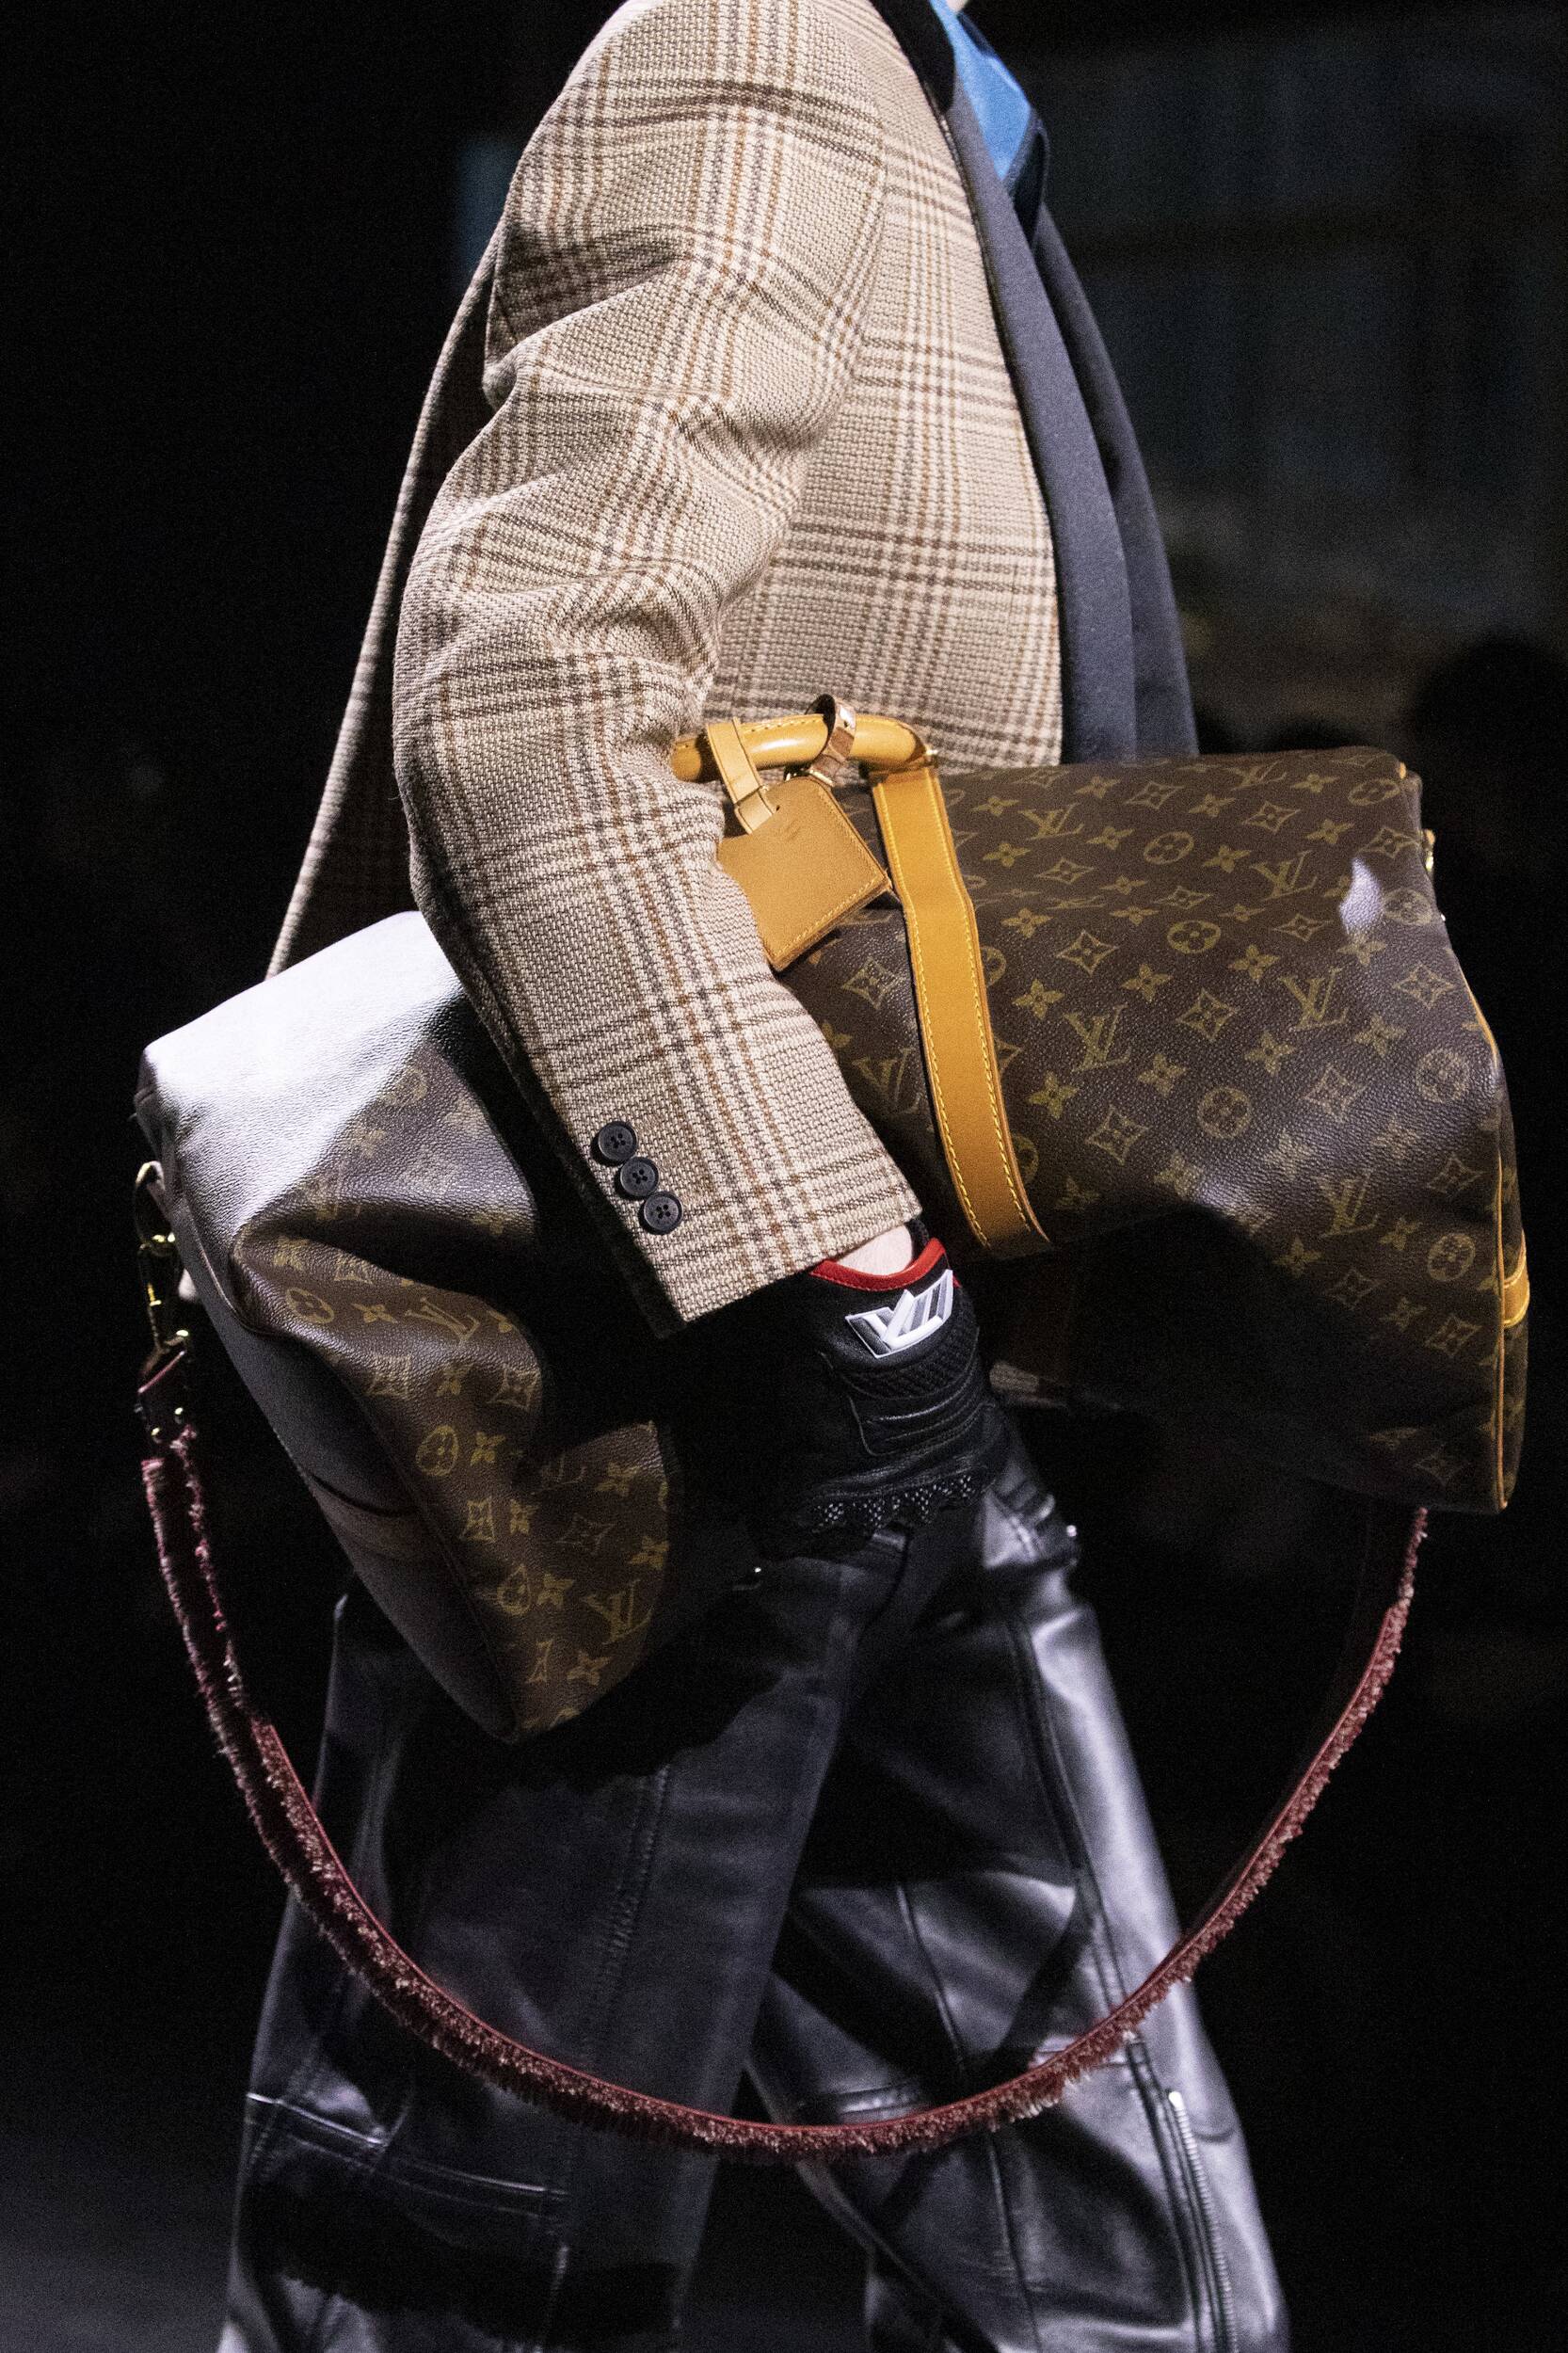 LOUIS VUITTON FALL WINTER 2020 WOMEN’S COLLECTION DETAILS | The Skinny Beep